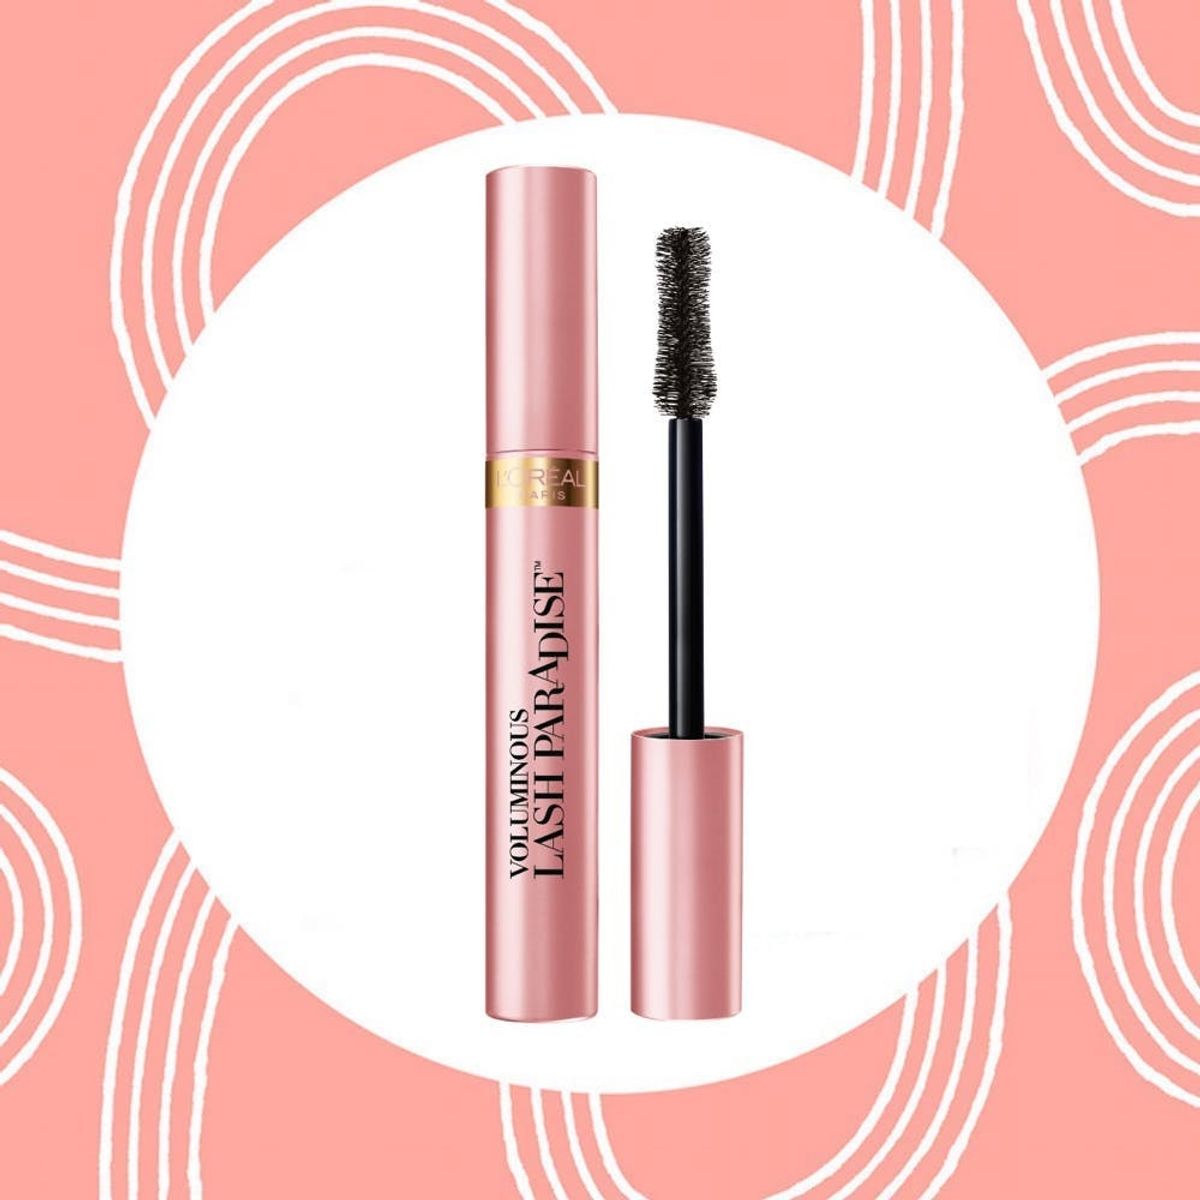 8 Beauty Products You Need for the Best Lashes of Your Life